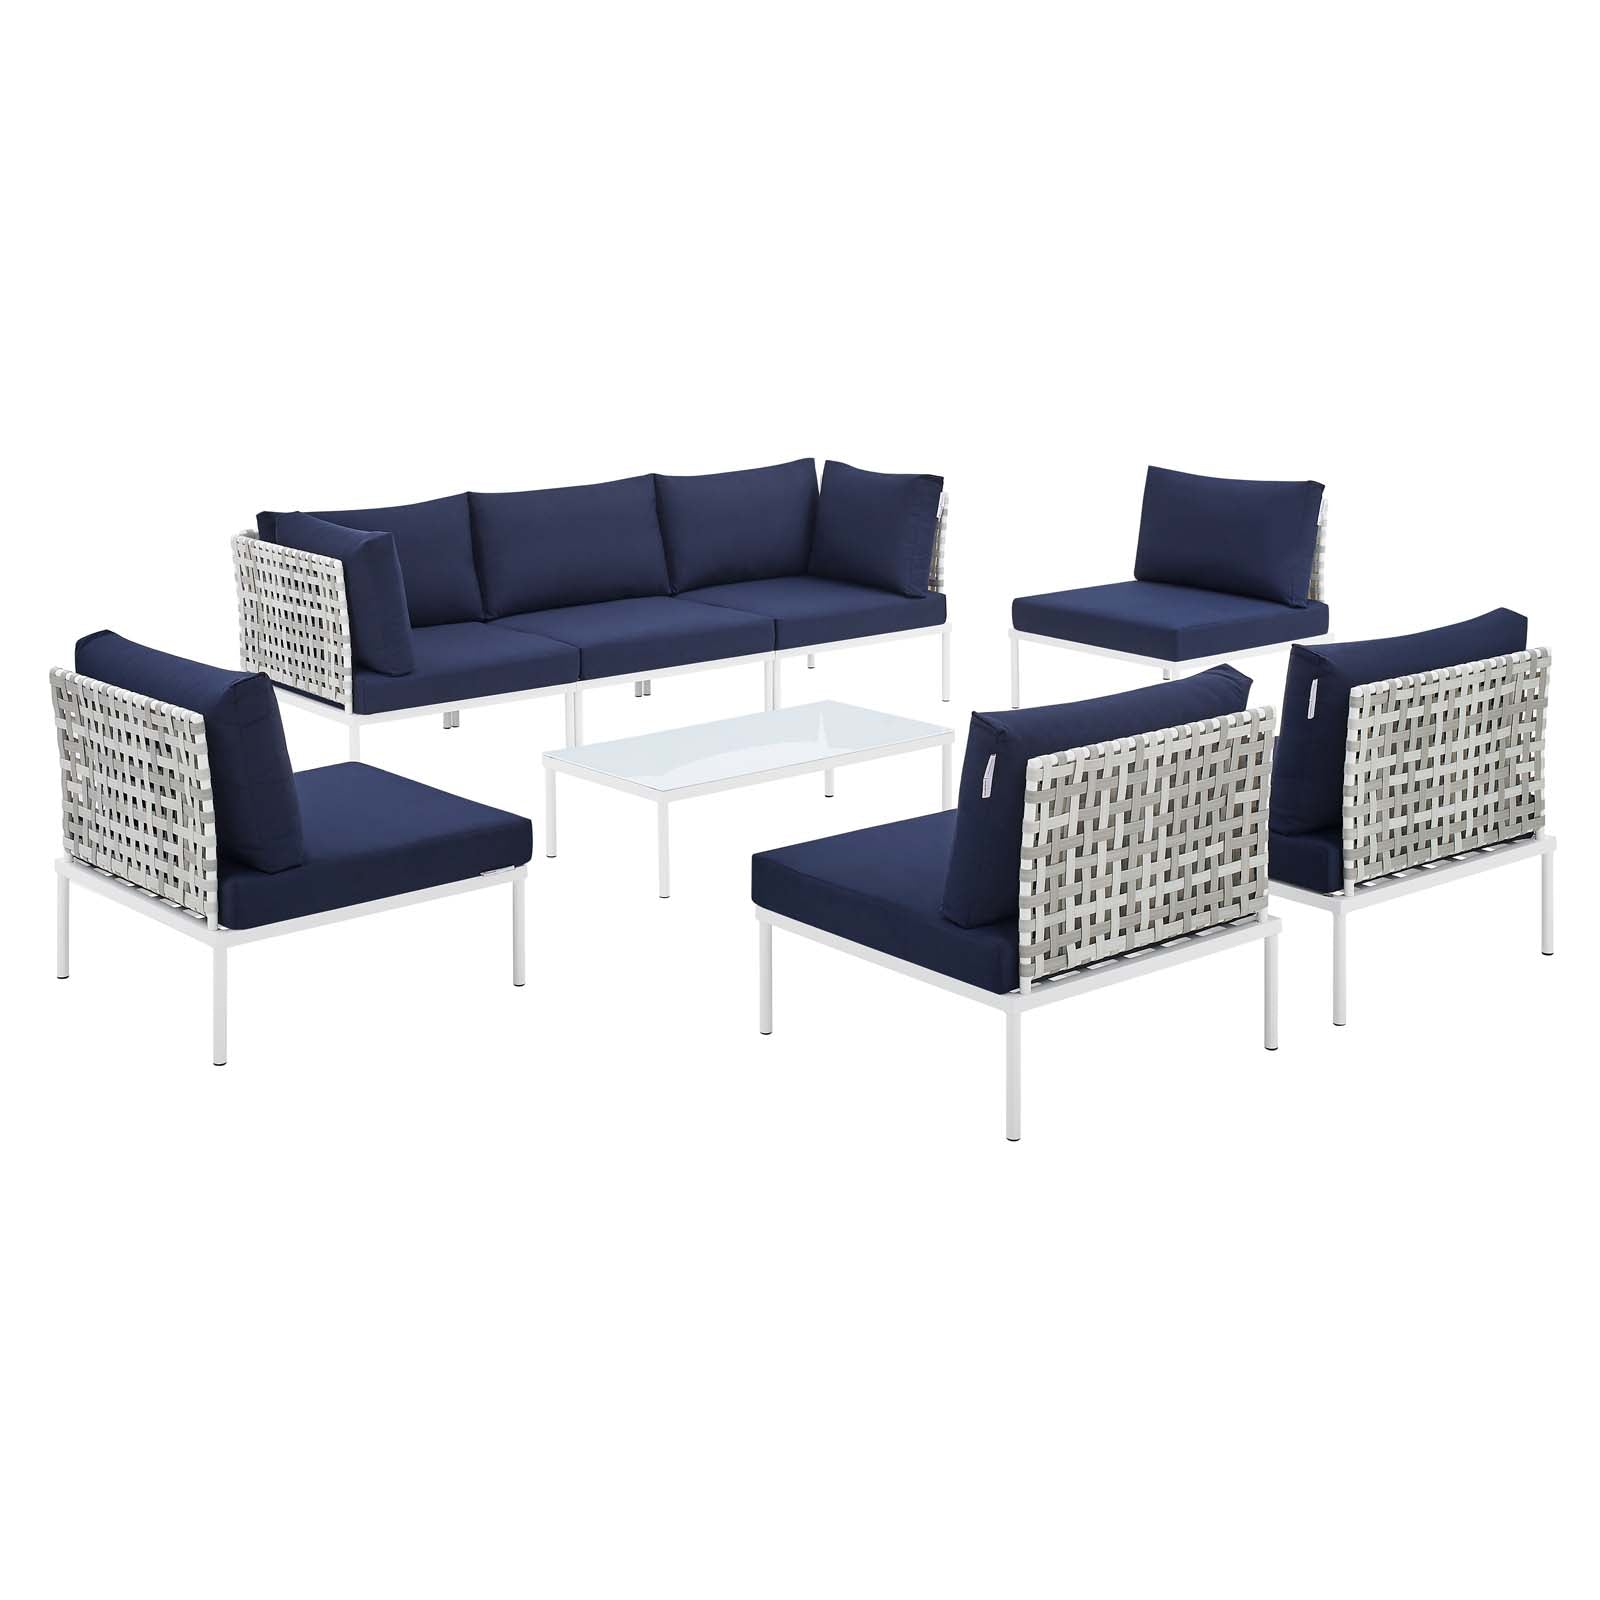 Modway Outdoor Conversation Sets - Harmony 8 Piece Outdoor Patio 163" Sectional Sofa Set Taupe Navy